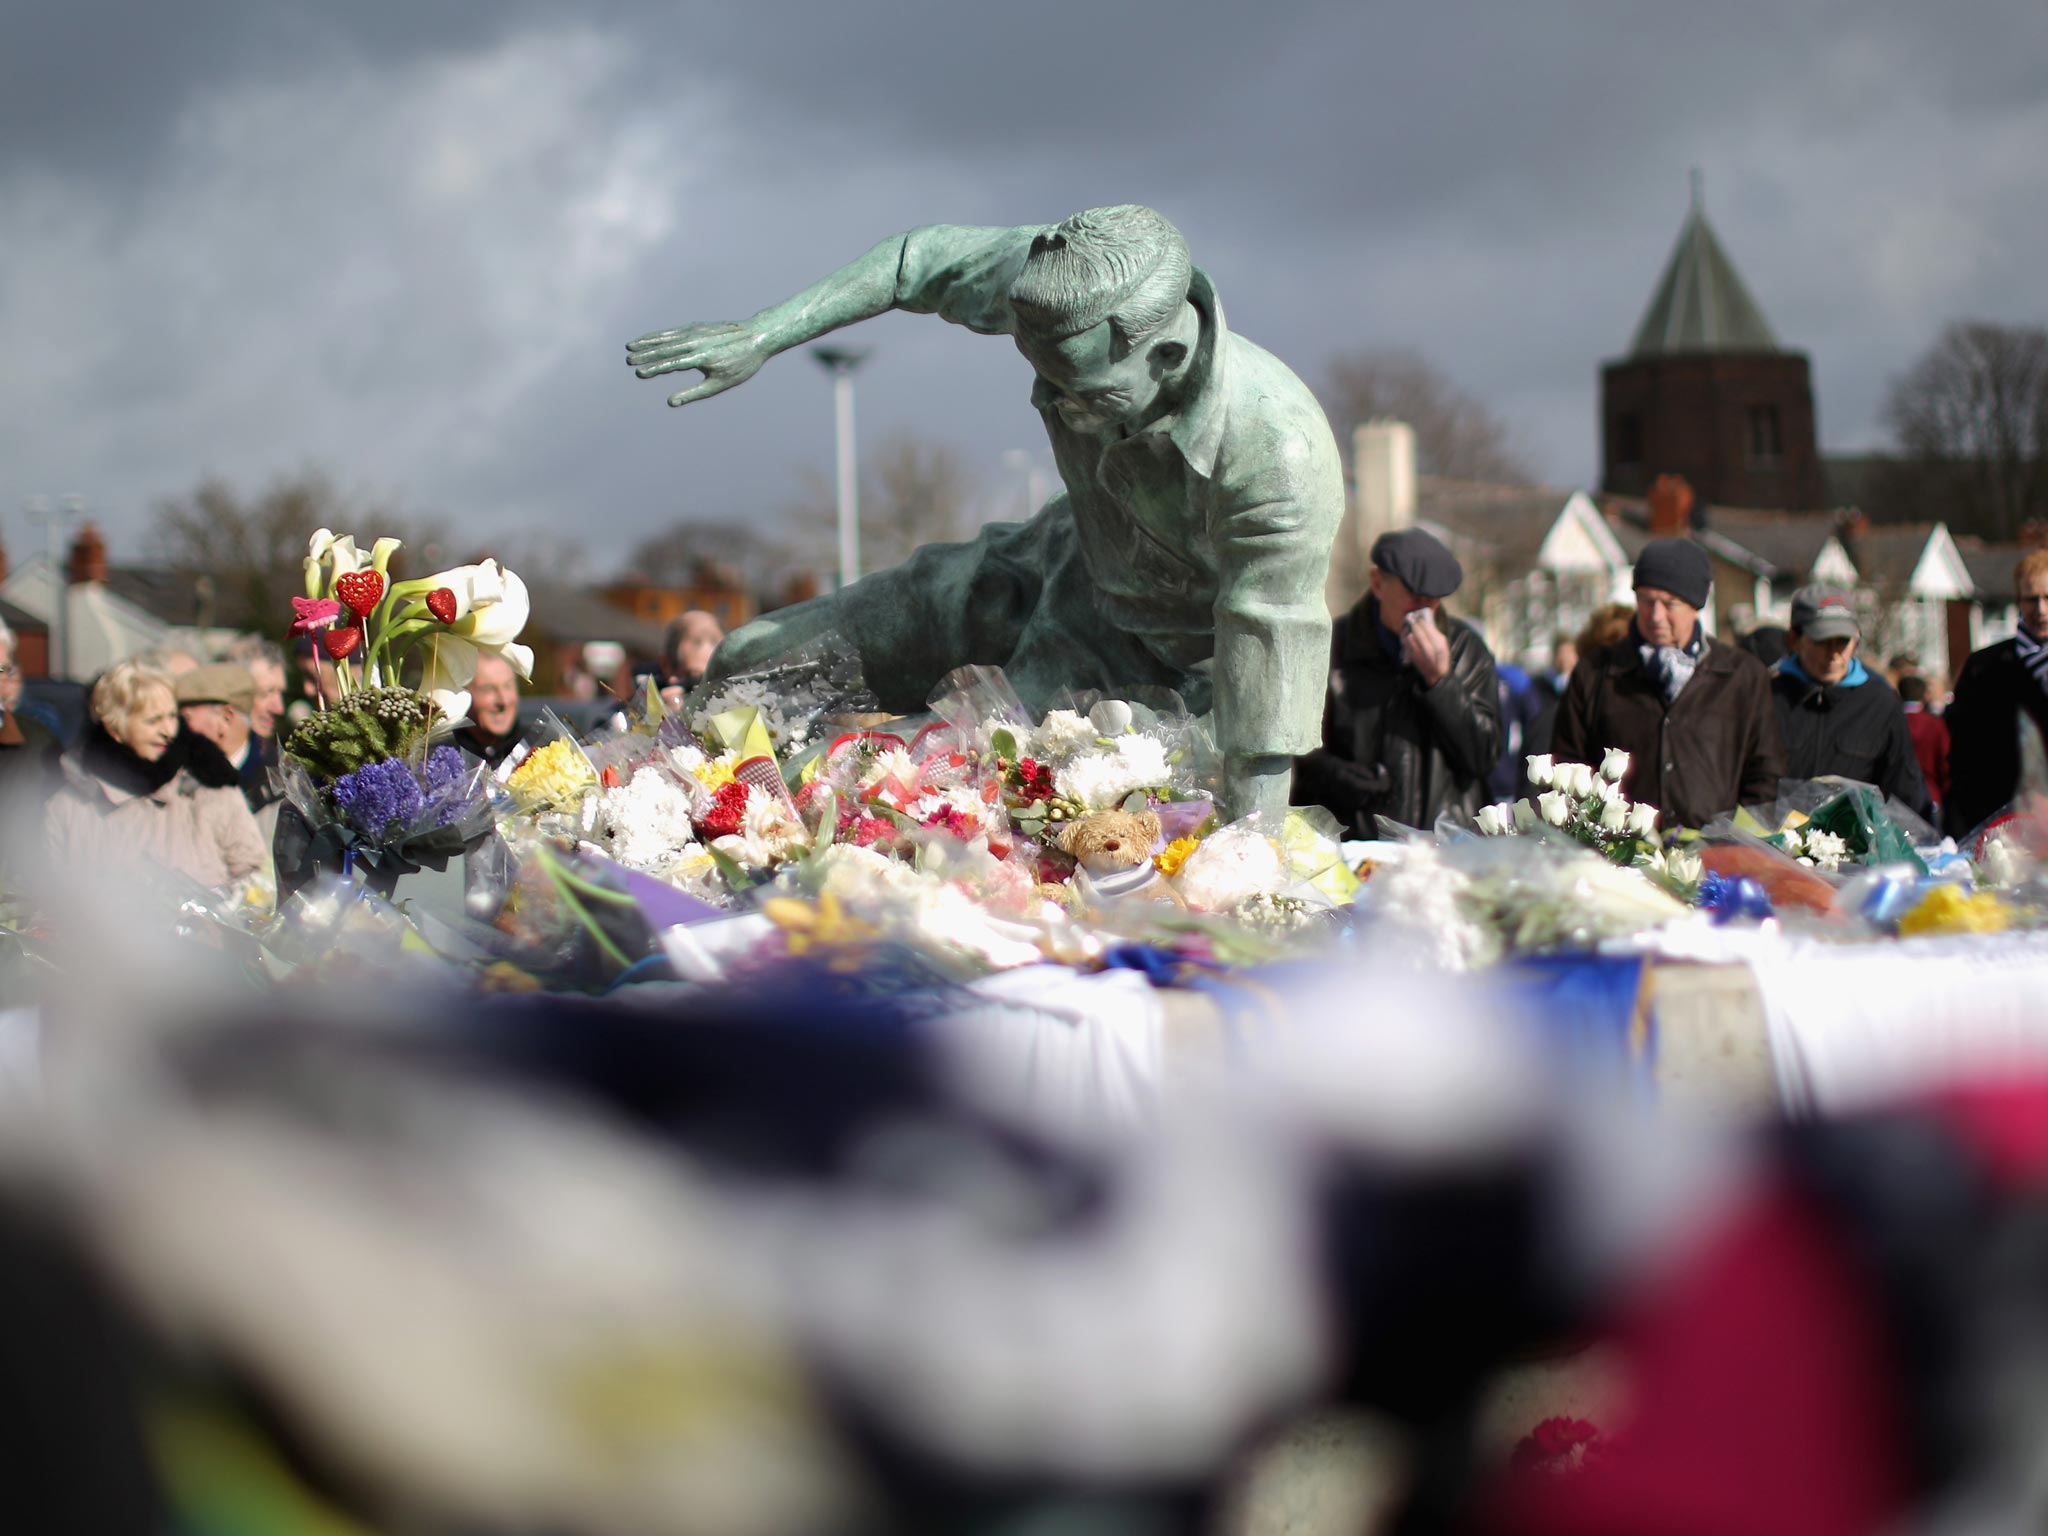 Flowers and tributes adorn the statue of Sir Tom Finney at Deepdale Stadium the home of Preston North End FC